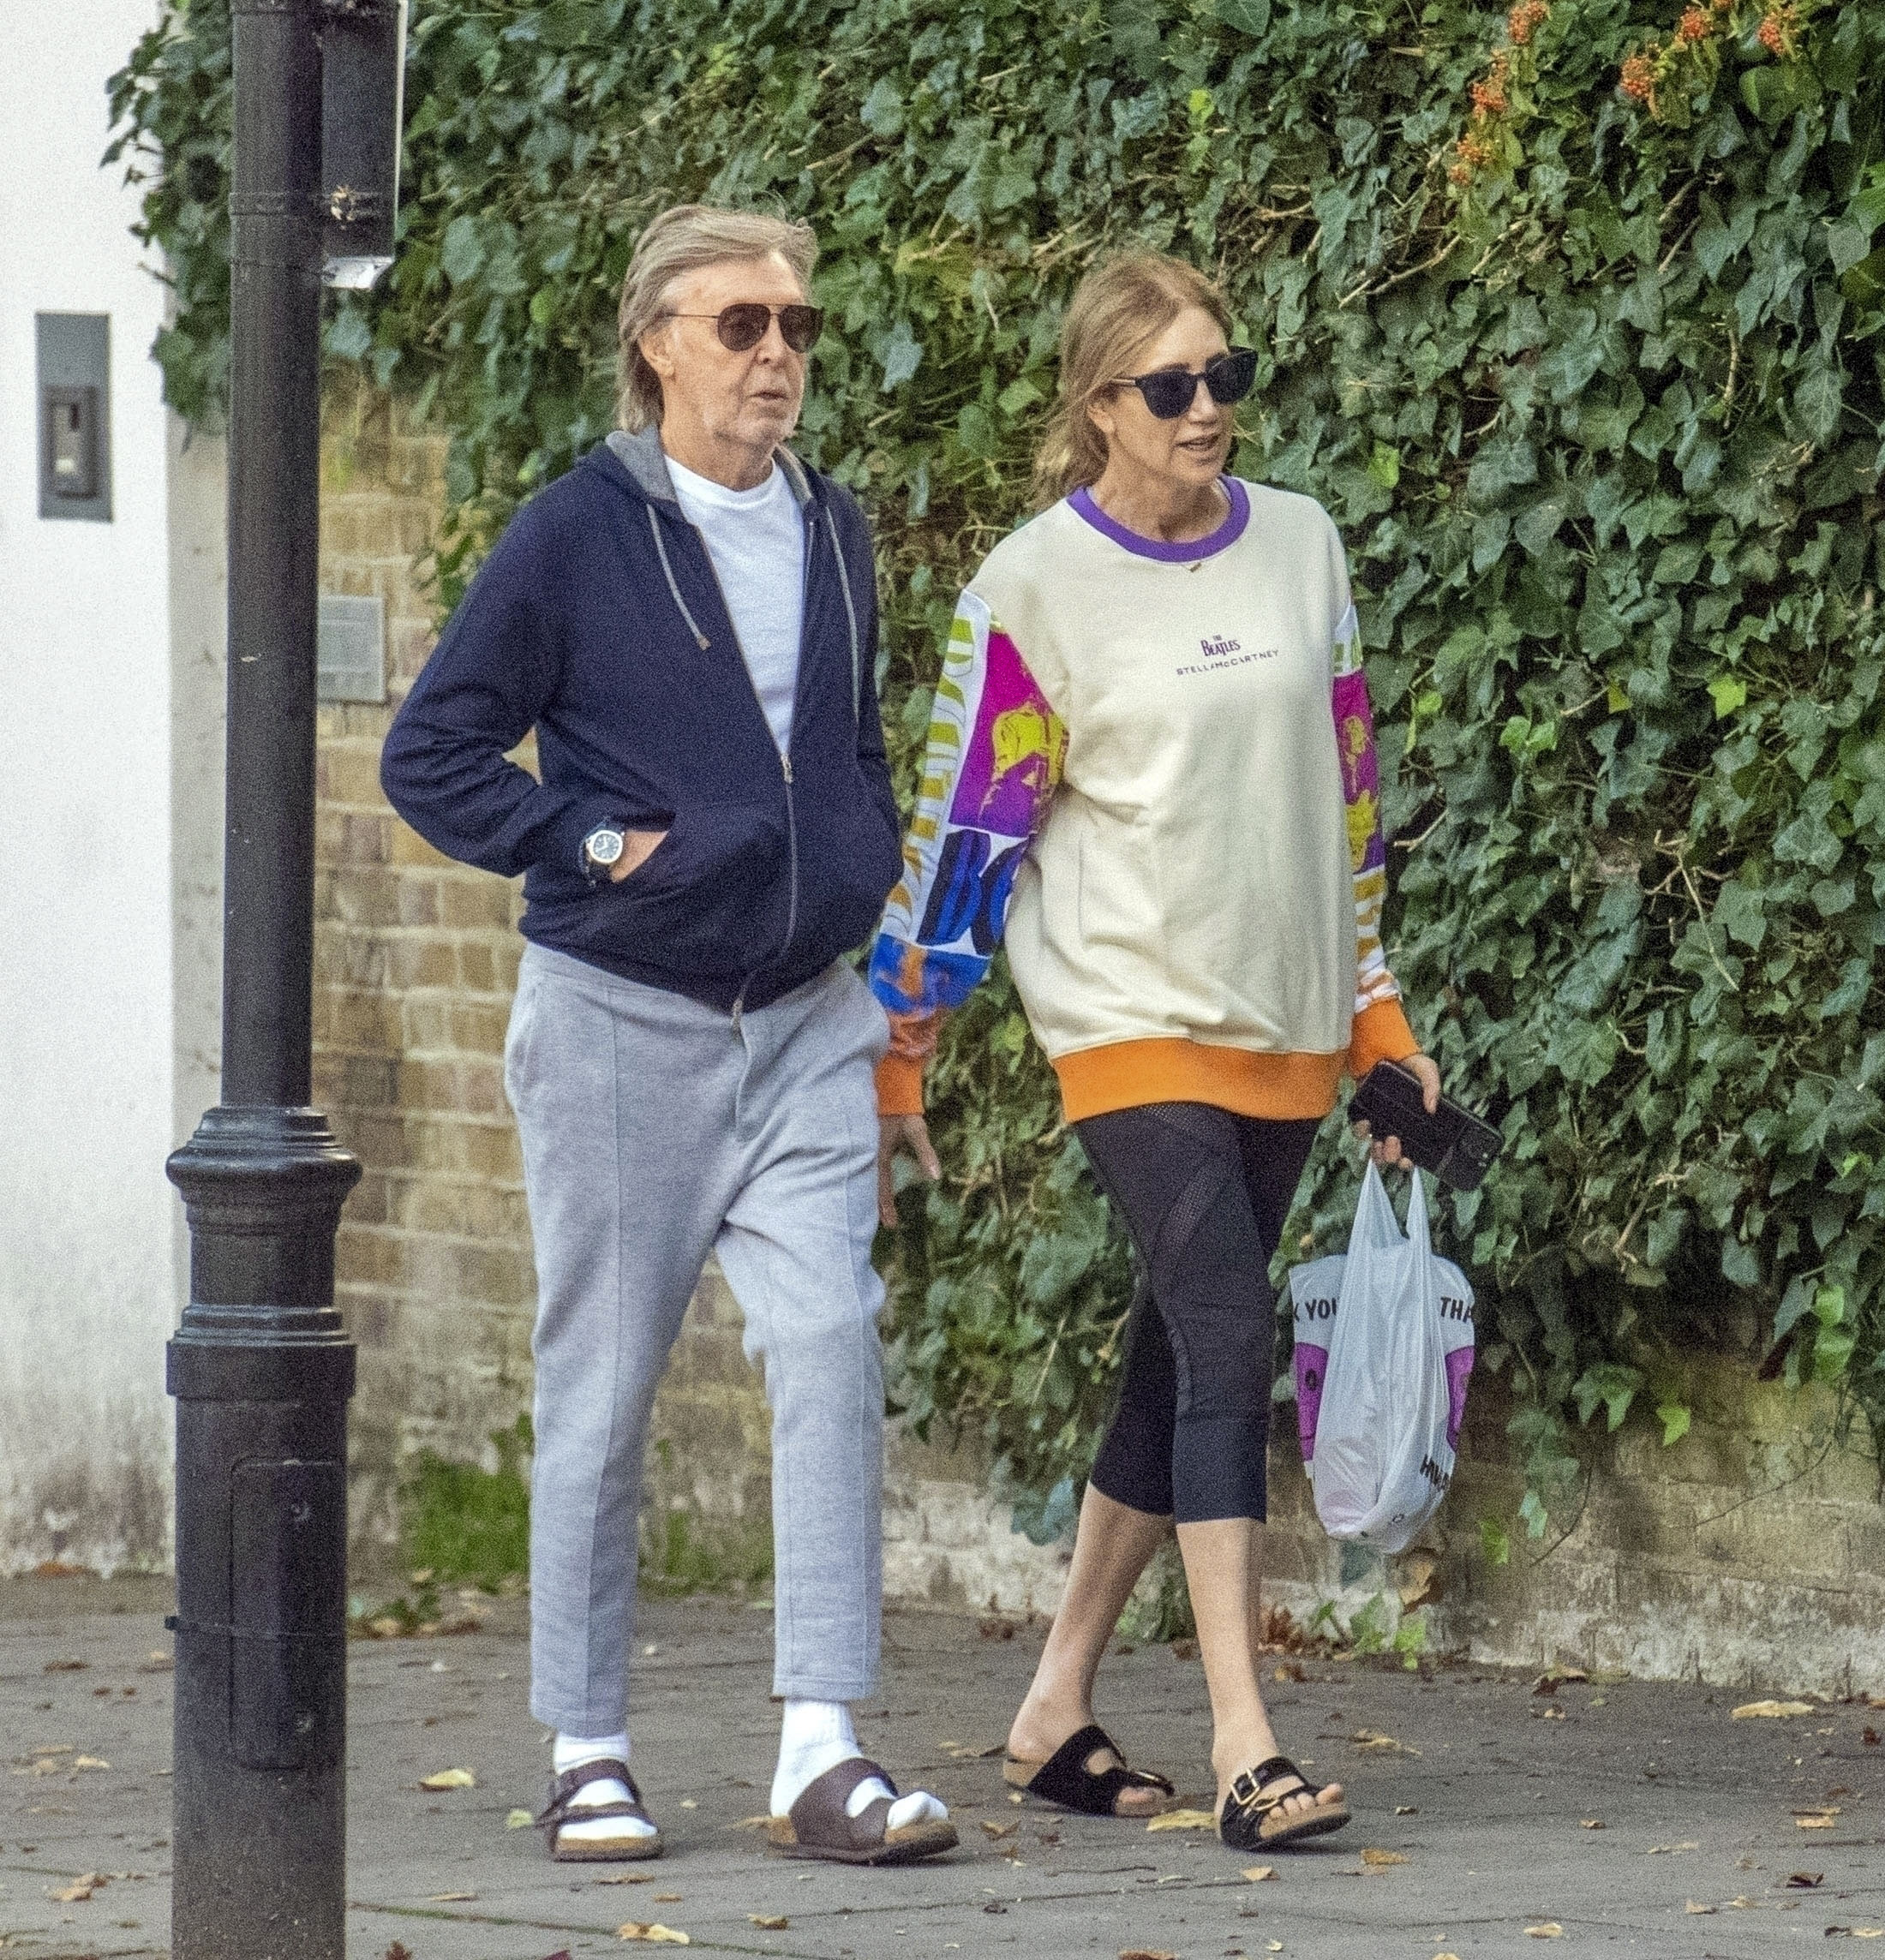 Paul McCartney and his wife, Nancy Shevell, took a walk through the streets of London.  Both were super informal, he in gray jogging, blue cotton jacket and Franciscan sandals with stockings and she in fisherman leggings, beige jumpsuit with colorful details and sandals.